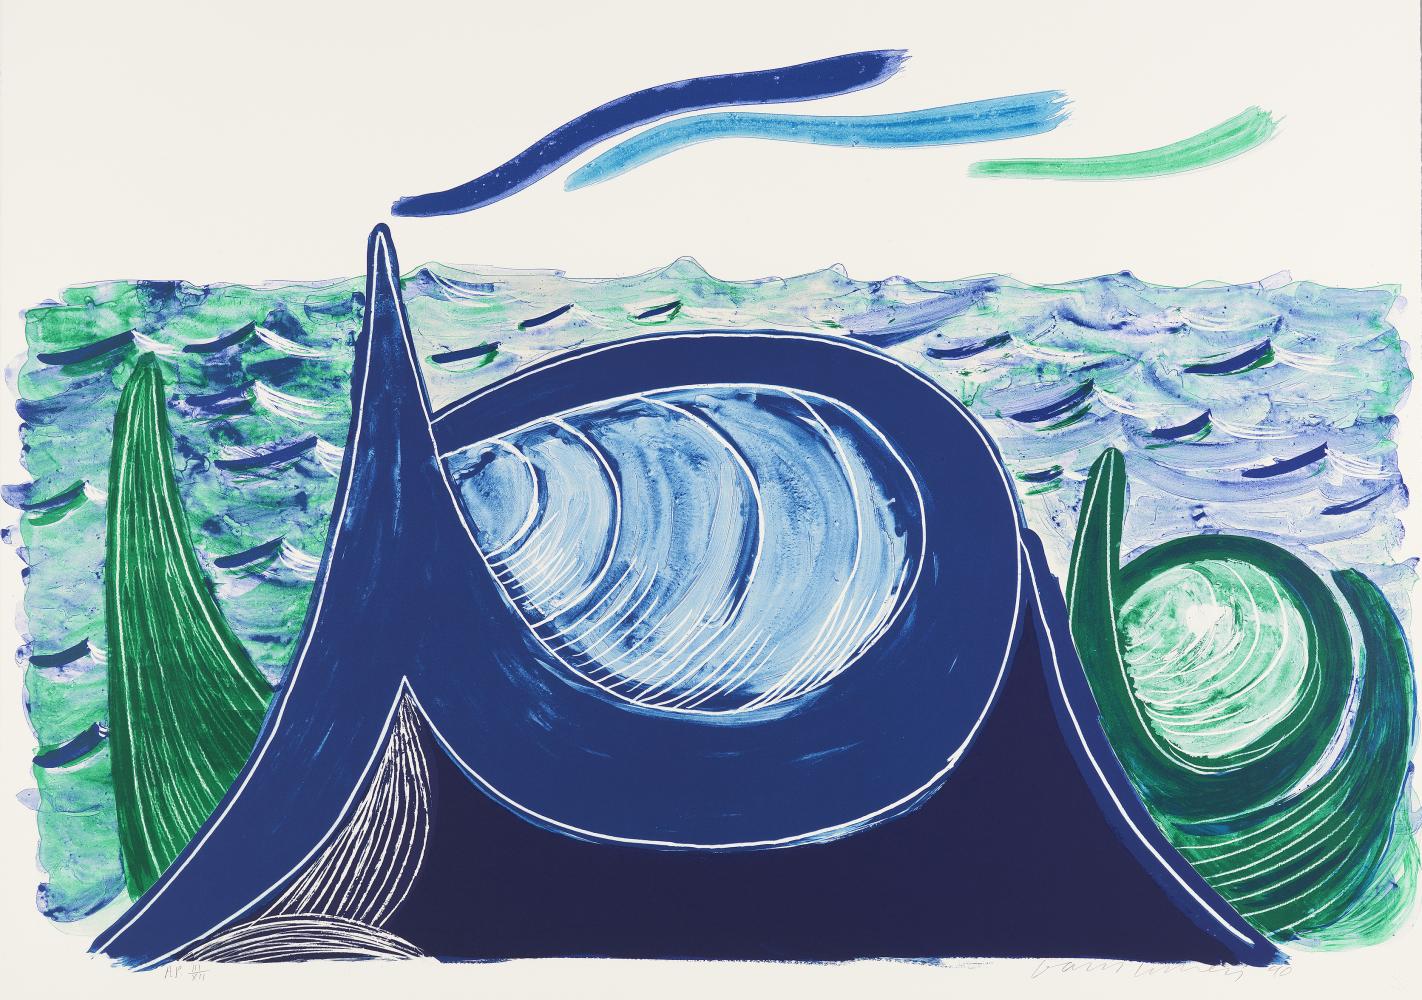 David Hockney "The Wave, A Lithograph", 1990